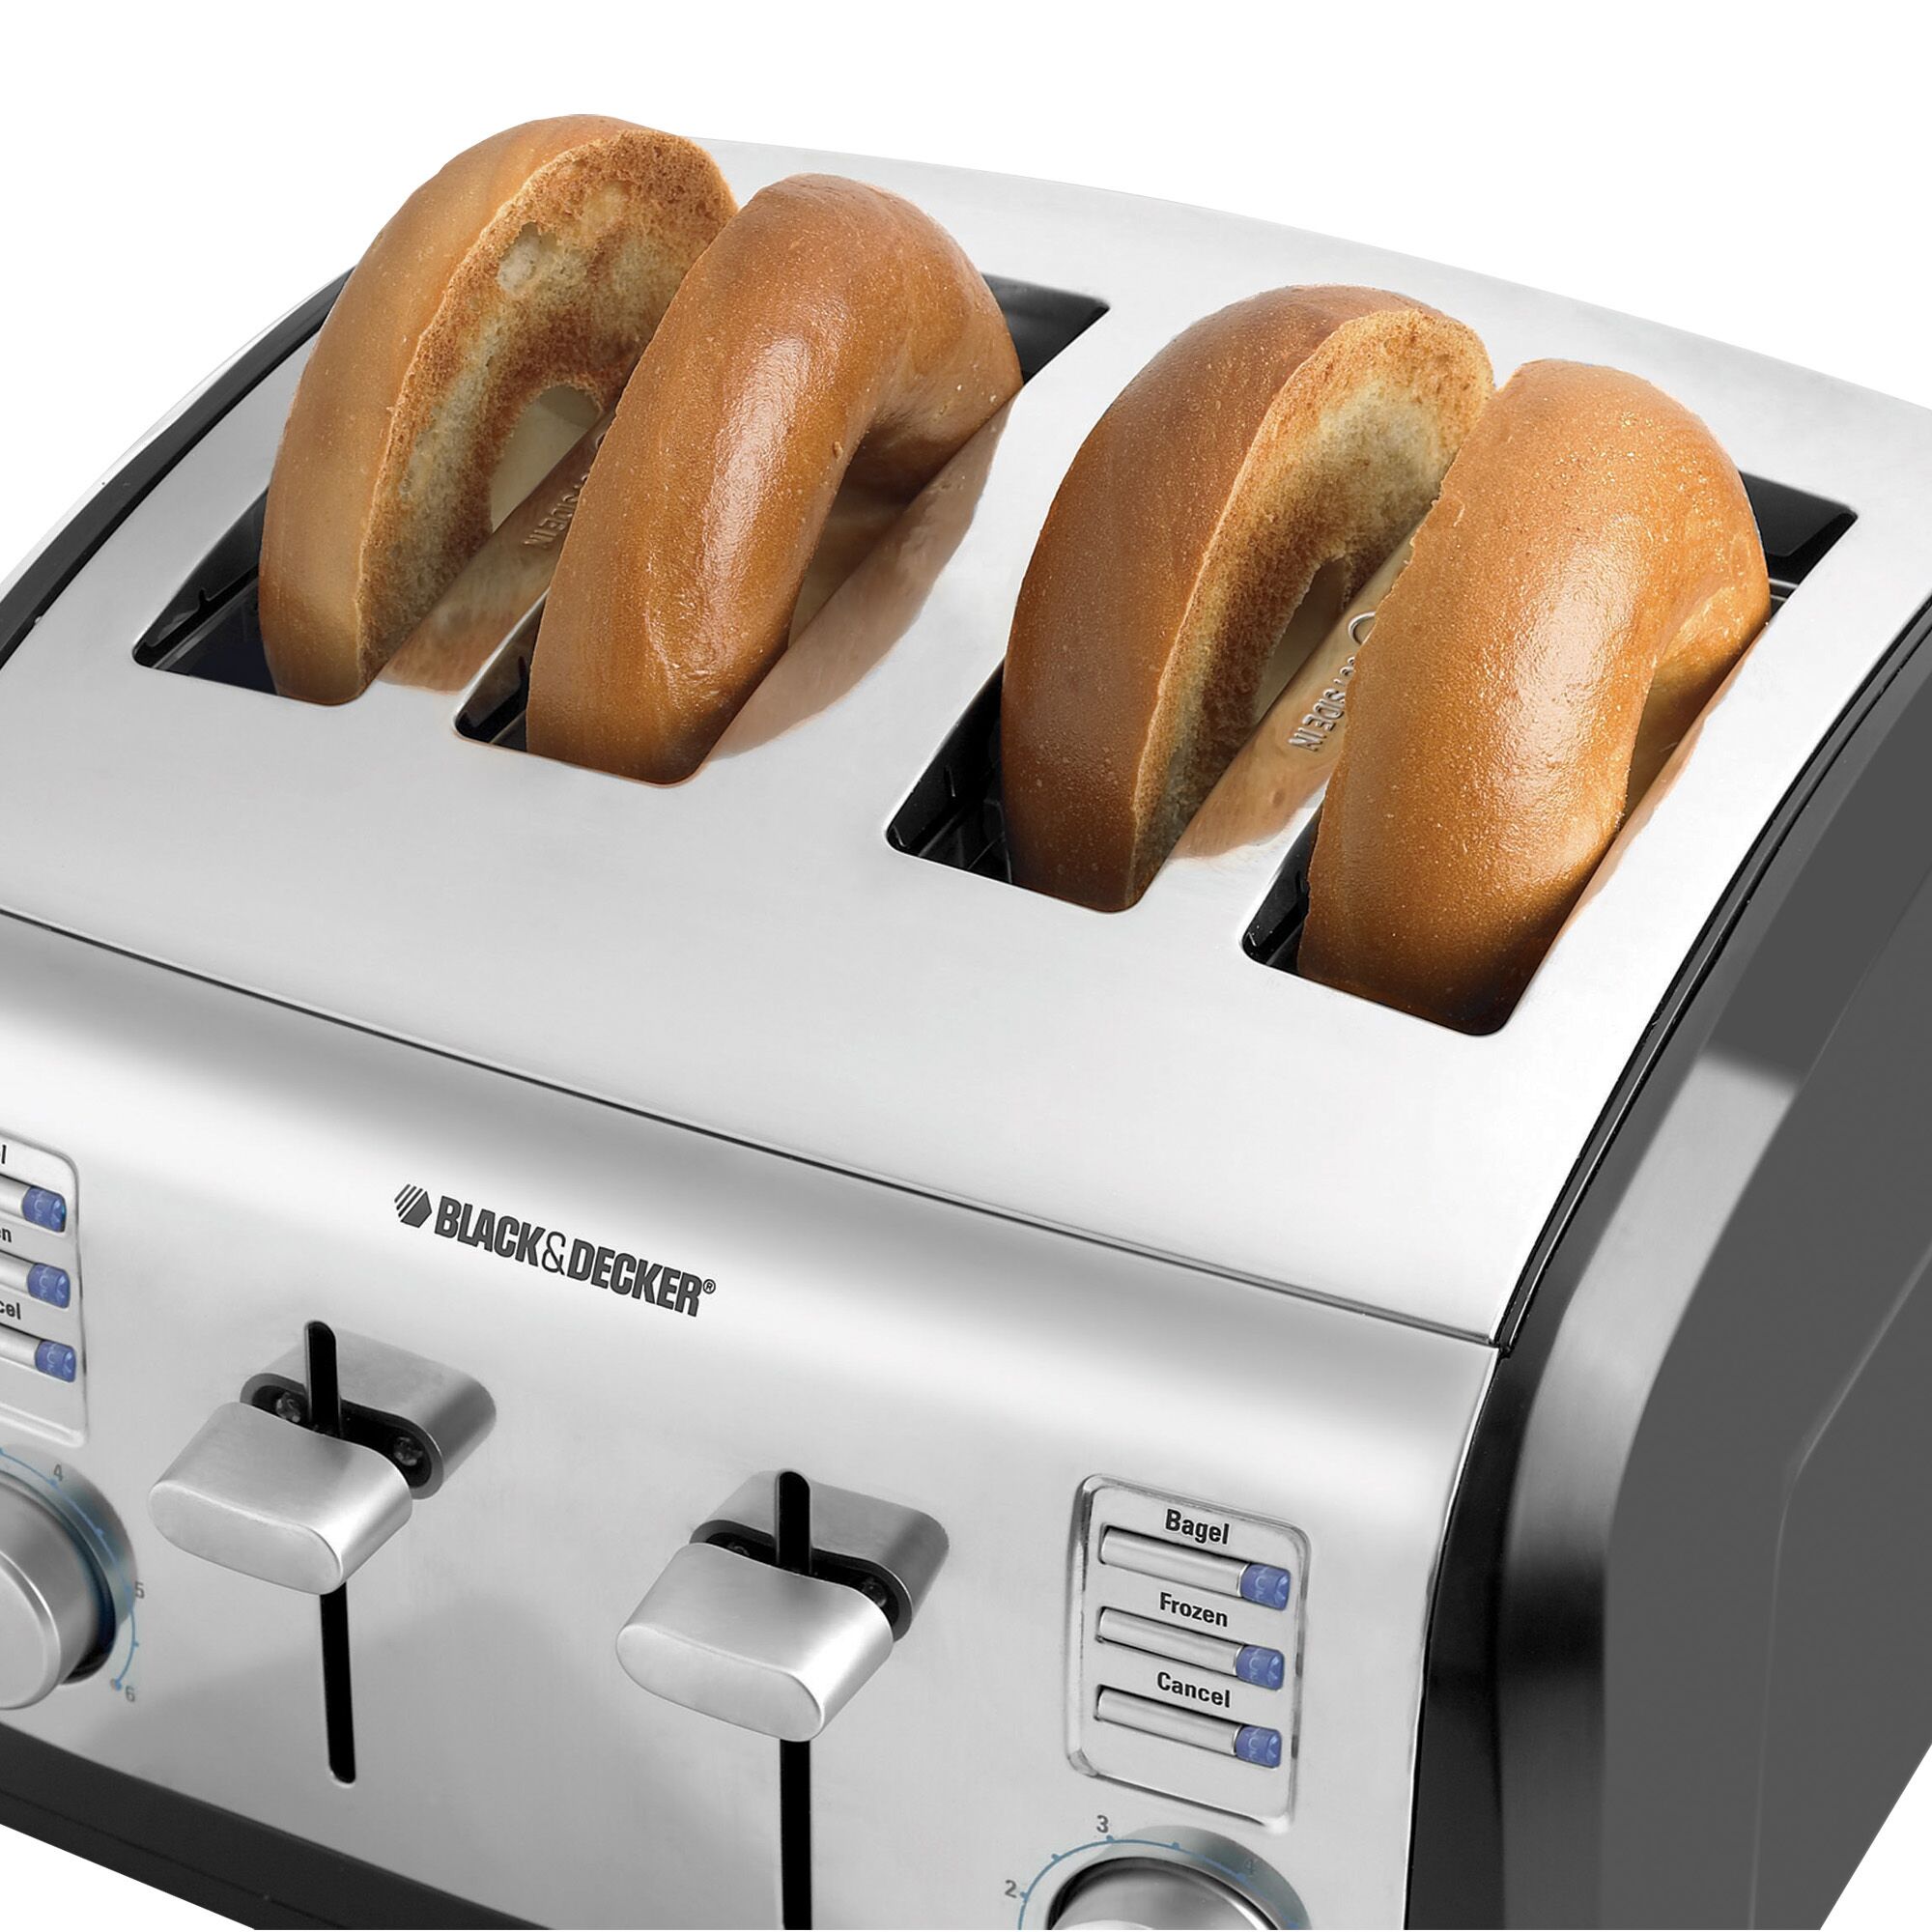 4-Slice Toaster with 4 slices of bagels one in each of the toaster slots